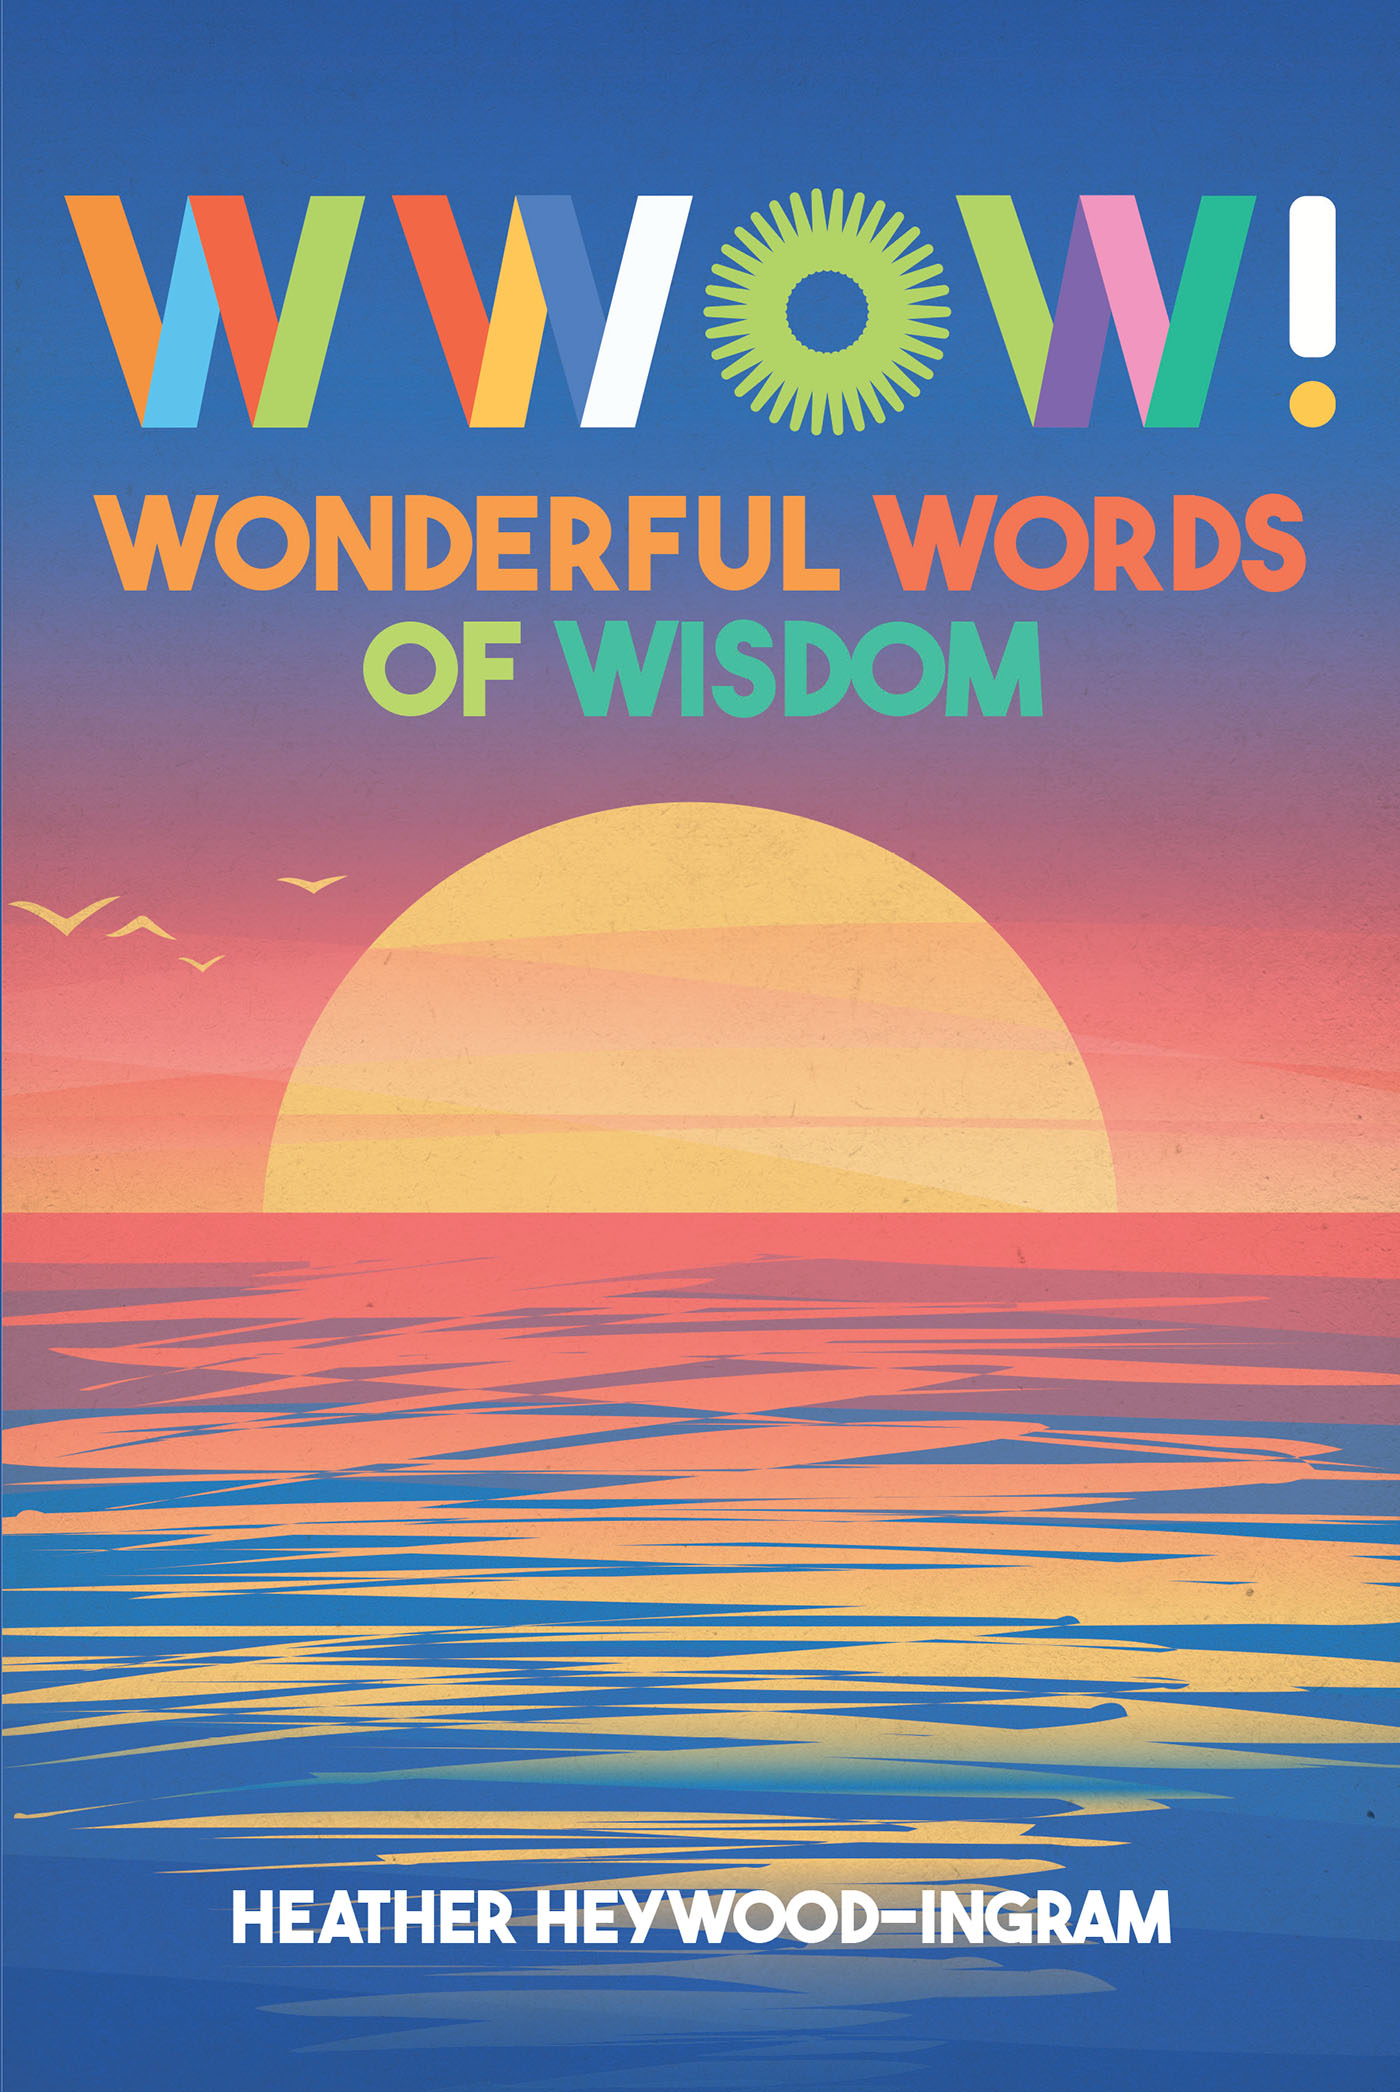 Heather Heywood-Ingram’s Newly Released "Wonderful Words of Wisdom" is a Charming Arrangement of Impassioned Poetry